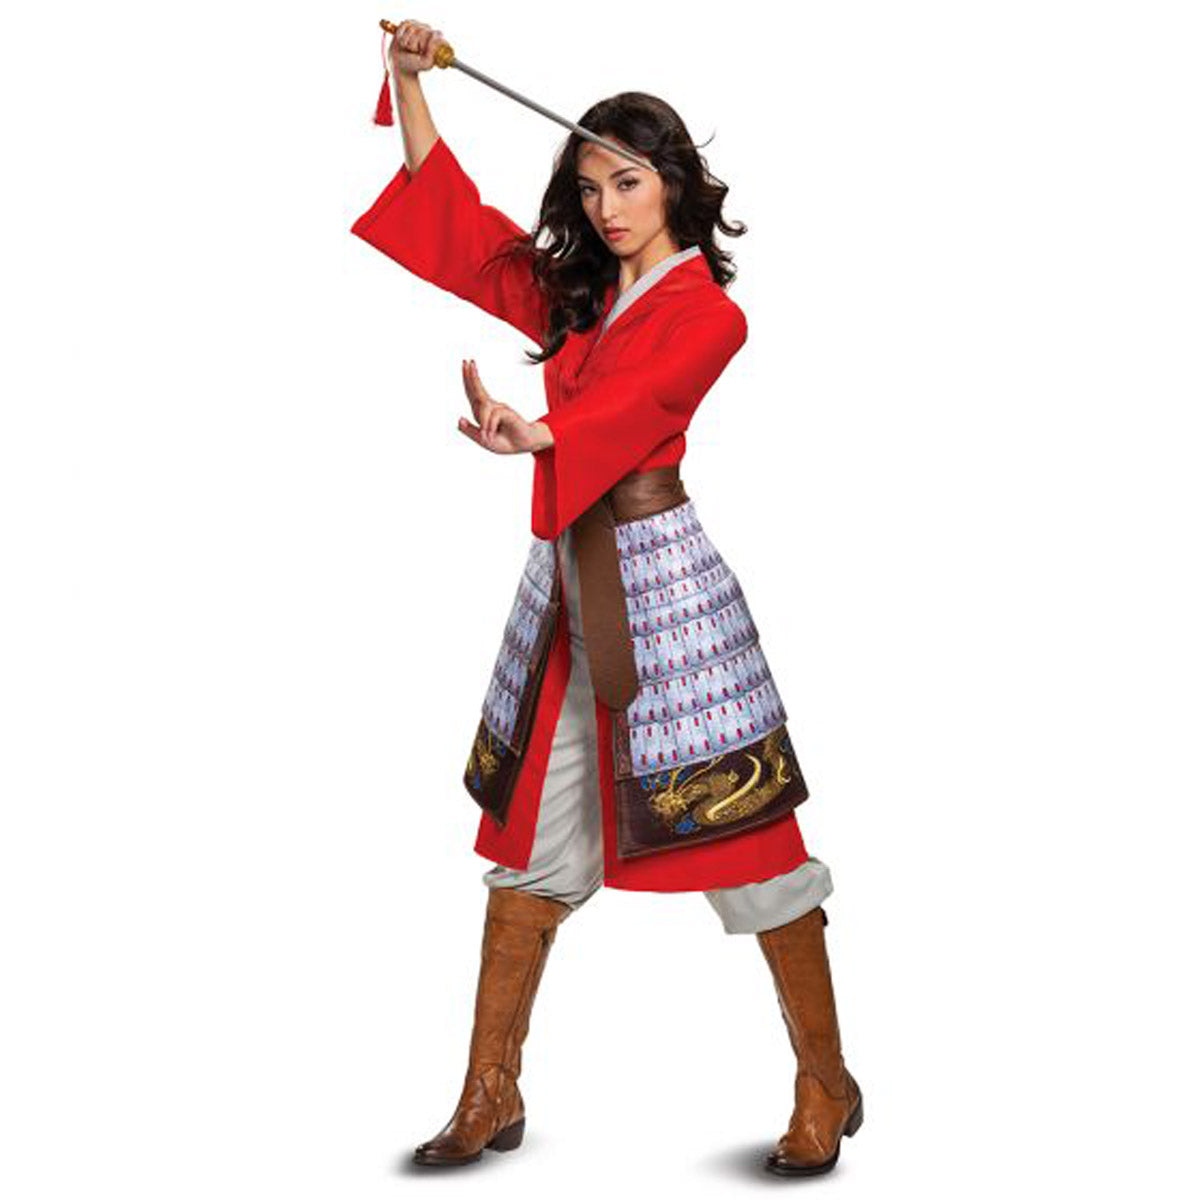 Mulan Hero Red Dress Deluxe Adult Disguise 79493